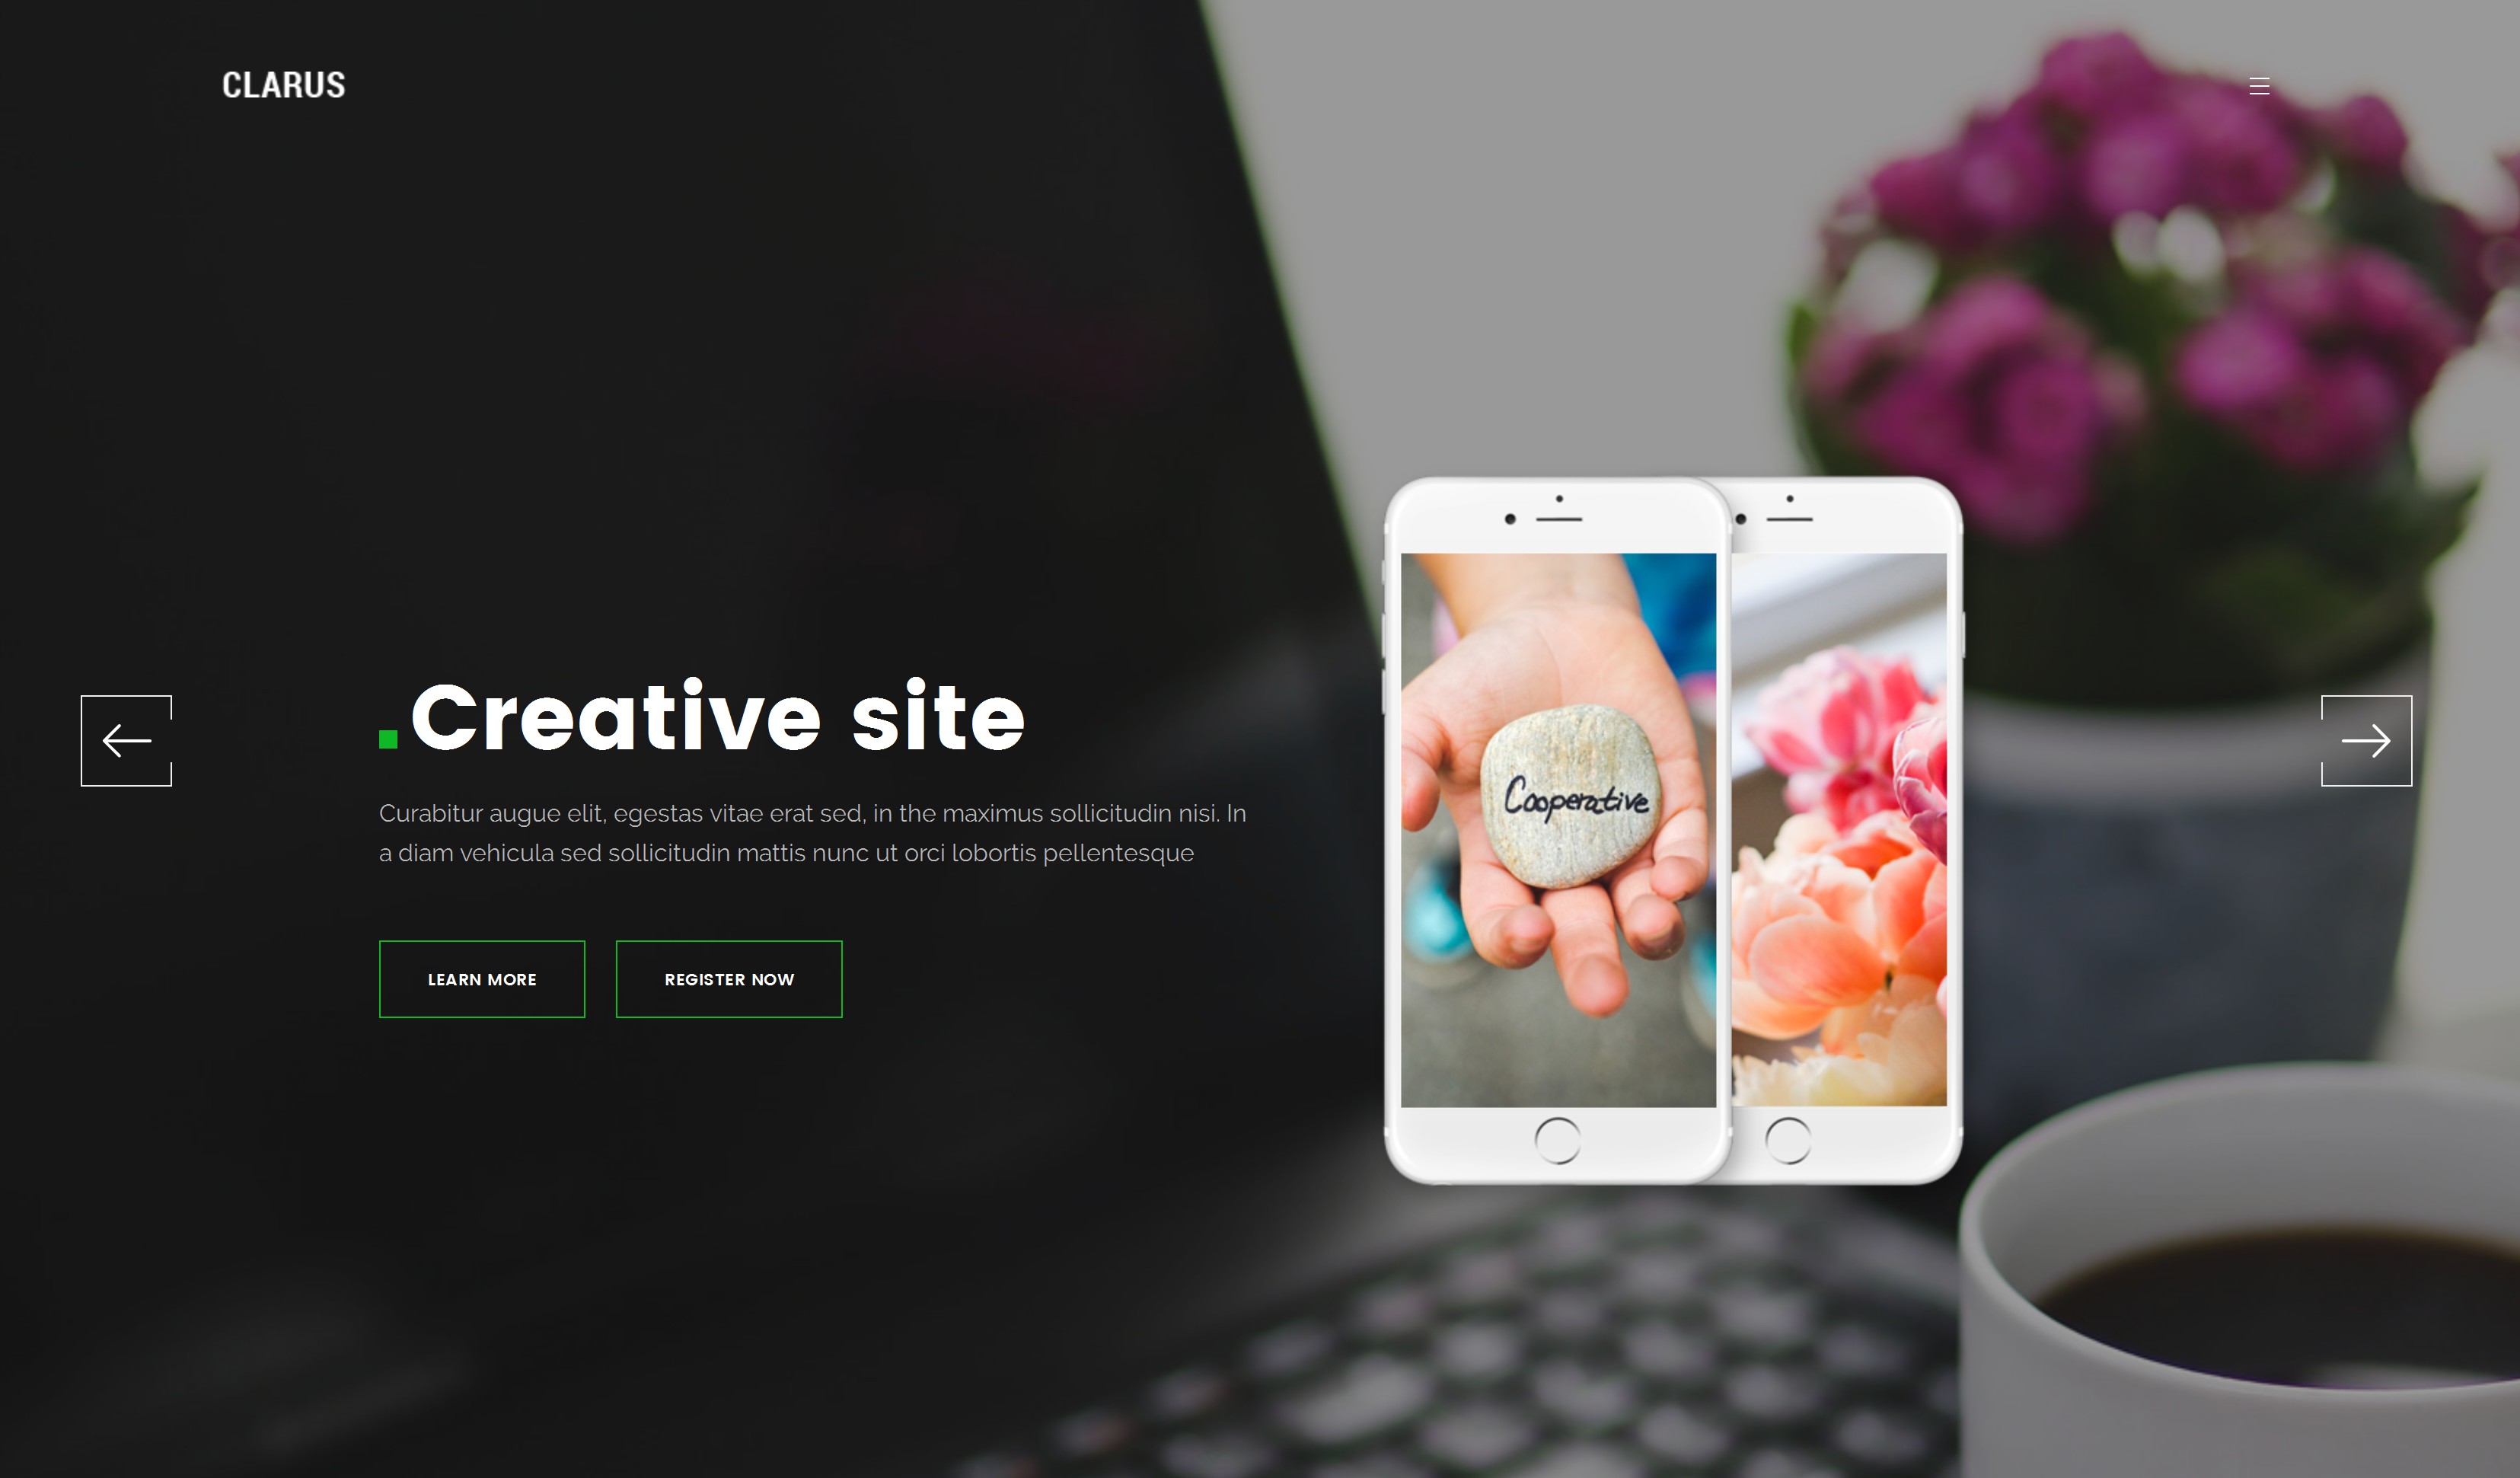 Responsive Bootstrap Landing Page Theme